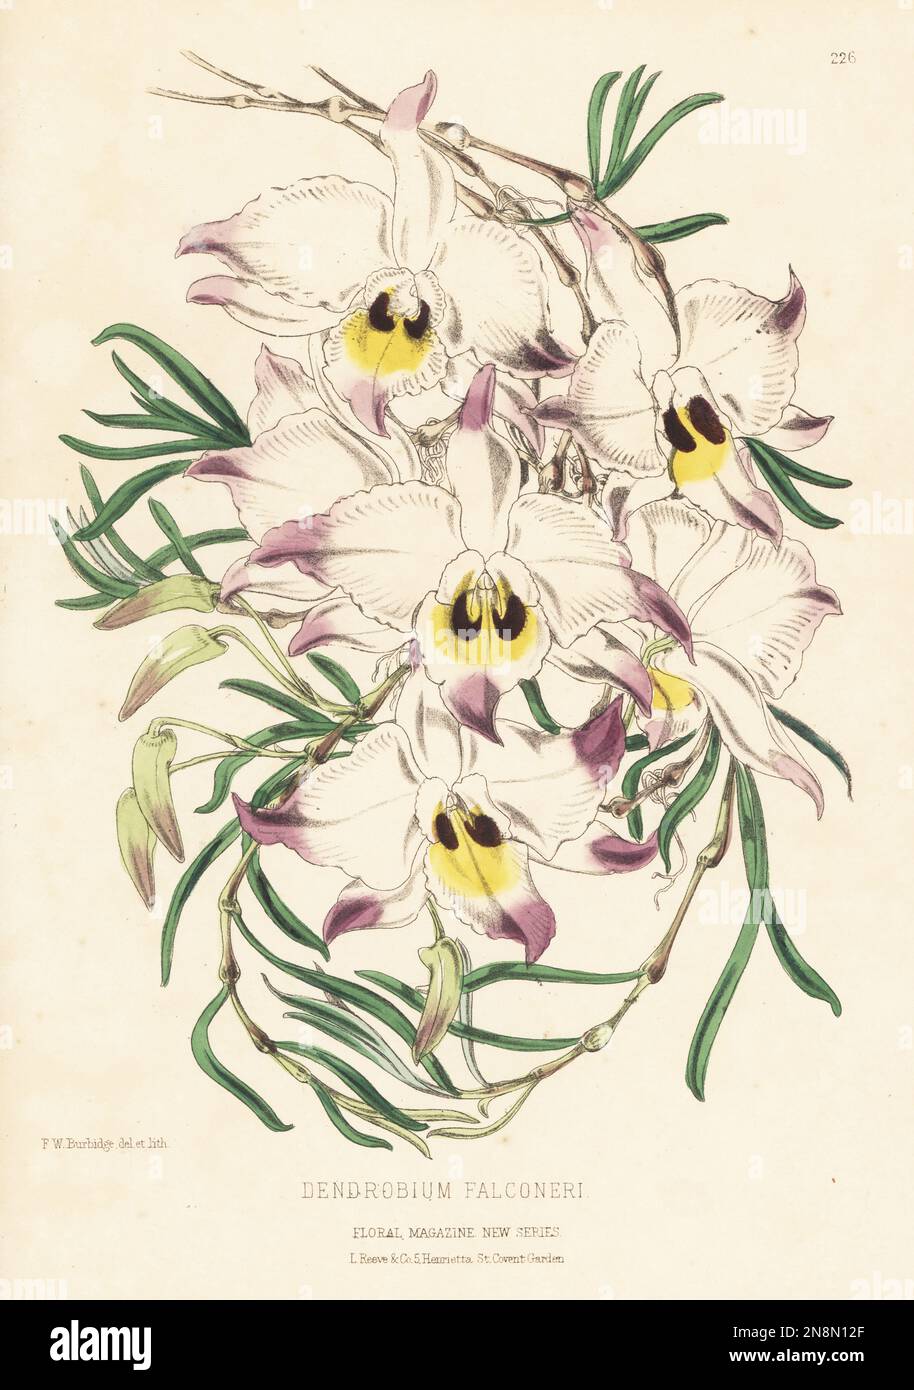 Dendrobium falconeri, or chuan zhu shi hu orchid, native to southern China, Taiwan, Bhutan, India and Indochina. Drawing of a plant raised by Sir W. Marriott of Down House, Blandford. Handcolored botanical illustration drawn and lithographed by Frederick William Burbidge from Henry Honywood Dombrain's Floral Magazine, New Series, Volume 5, L. Reeve, London, 1876. Lithograph printed by Vincent Brooks, Day & Son. Stock Photo